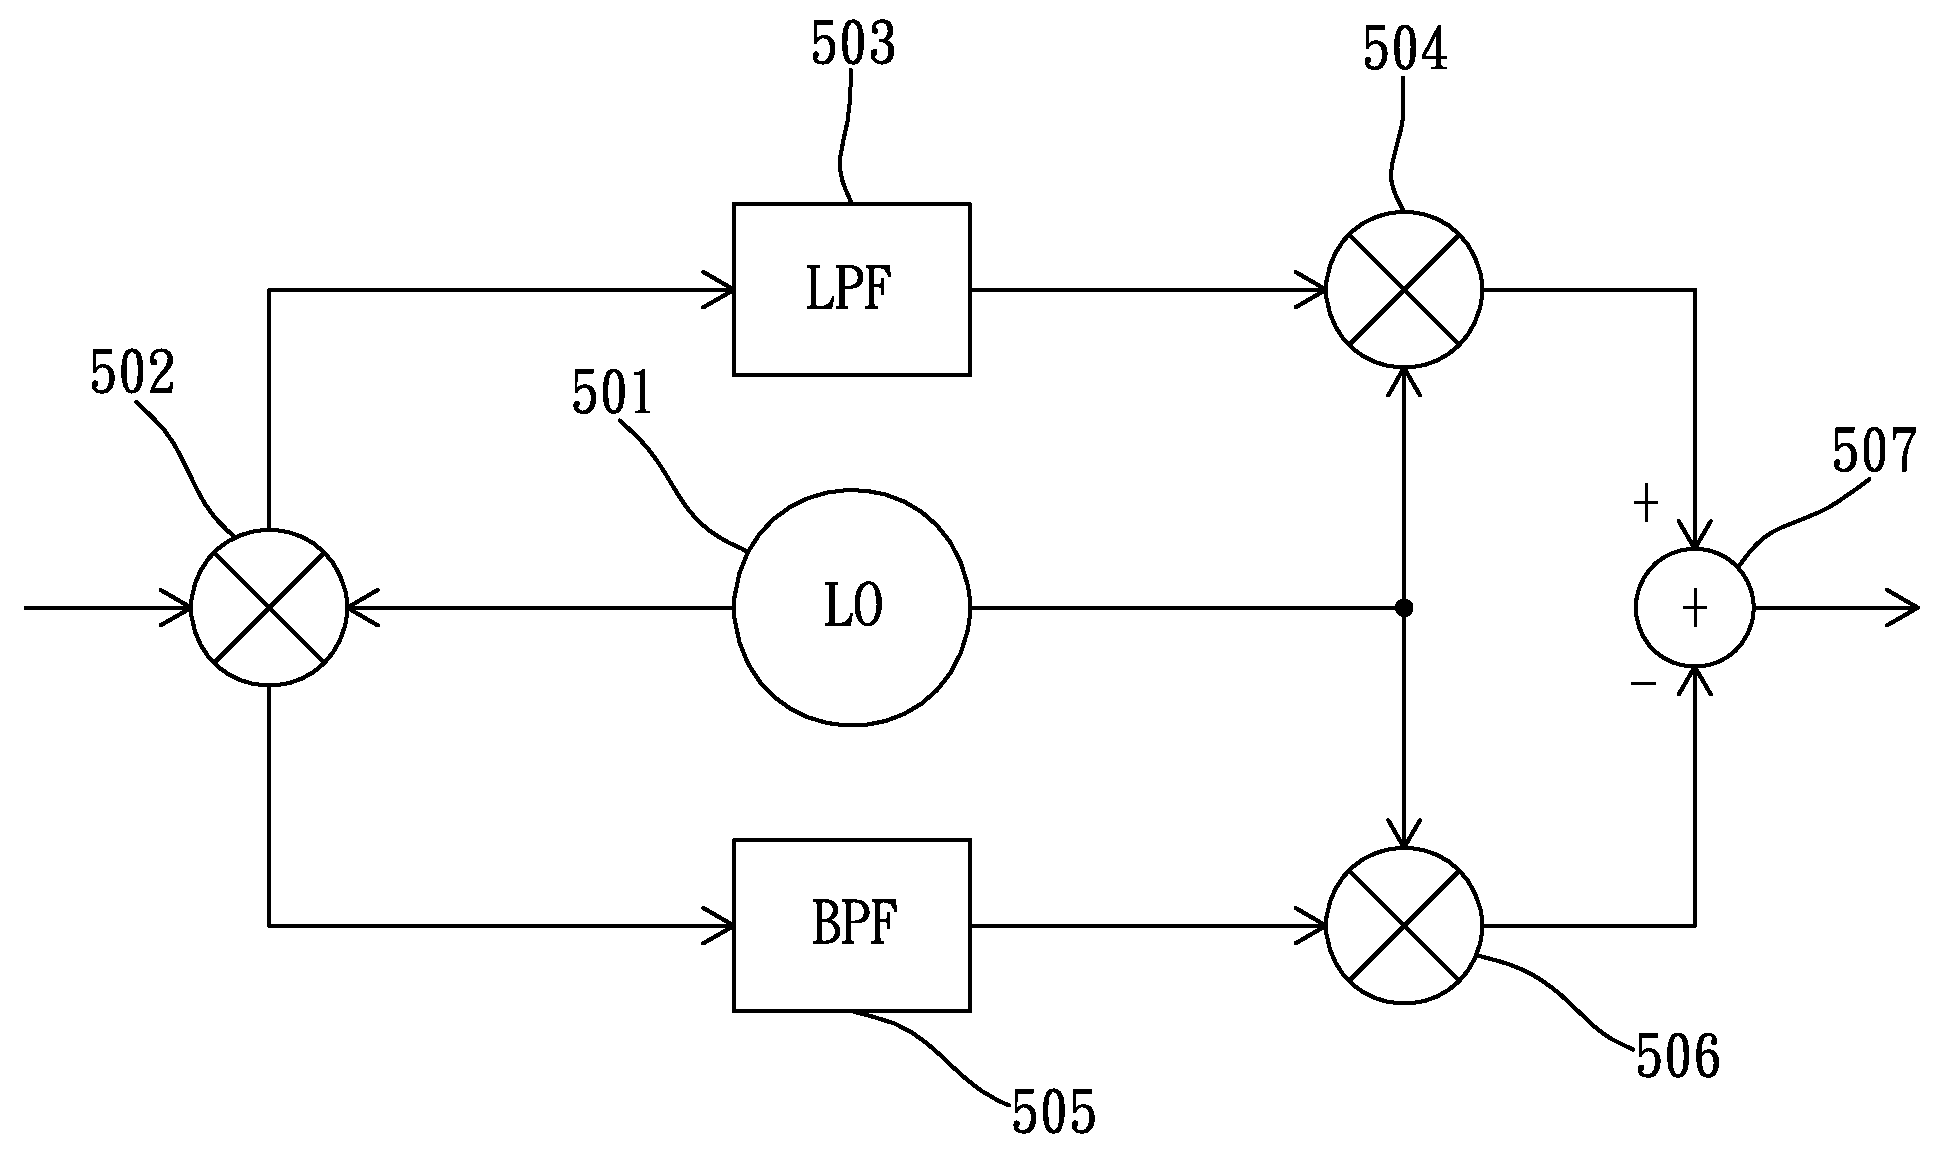 Interference cancellation circuit for a receiver